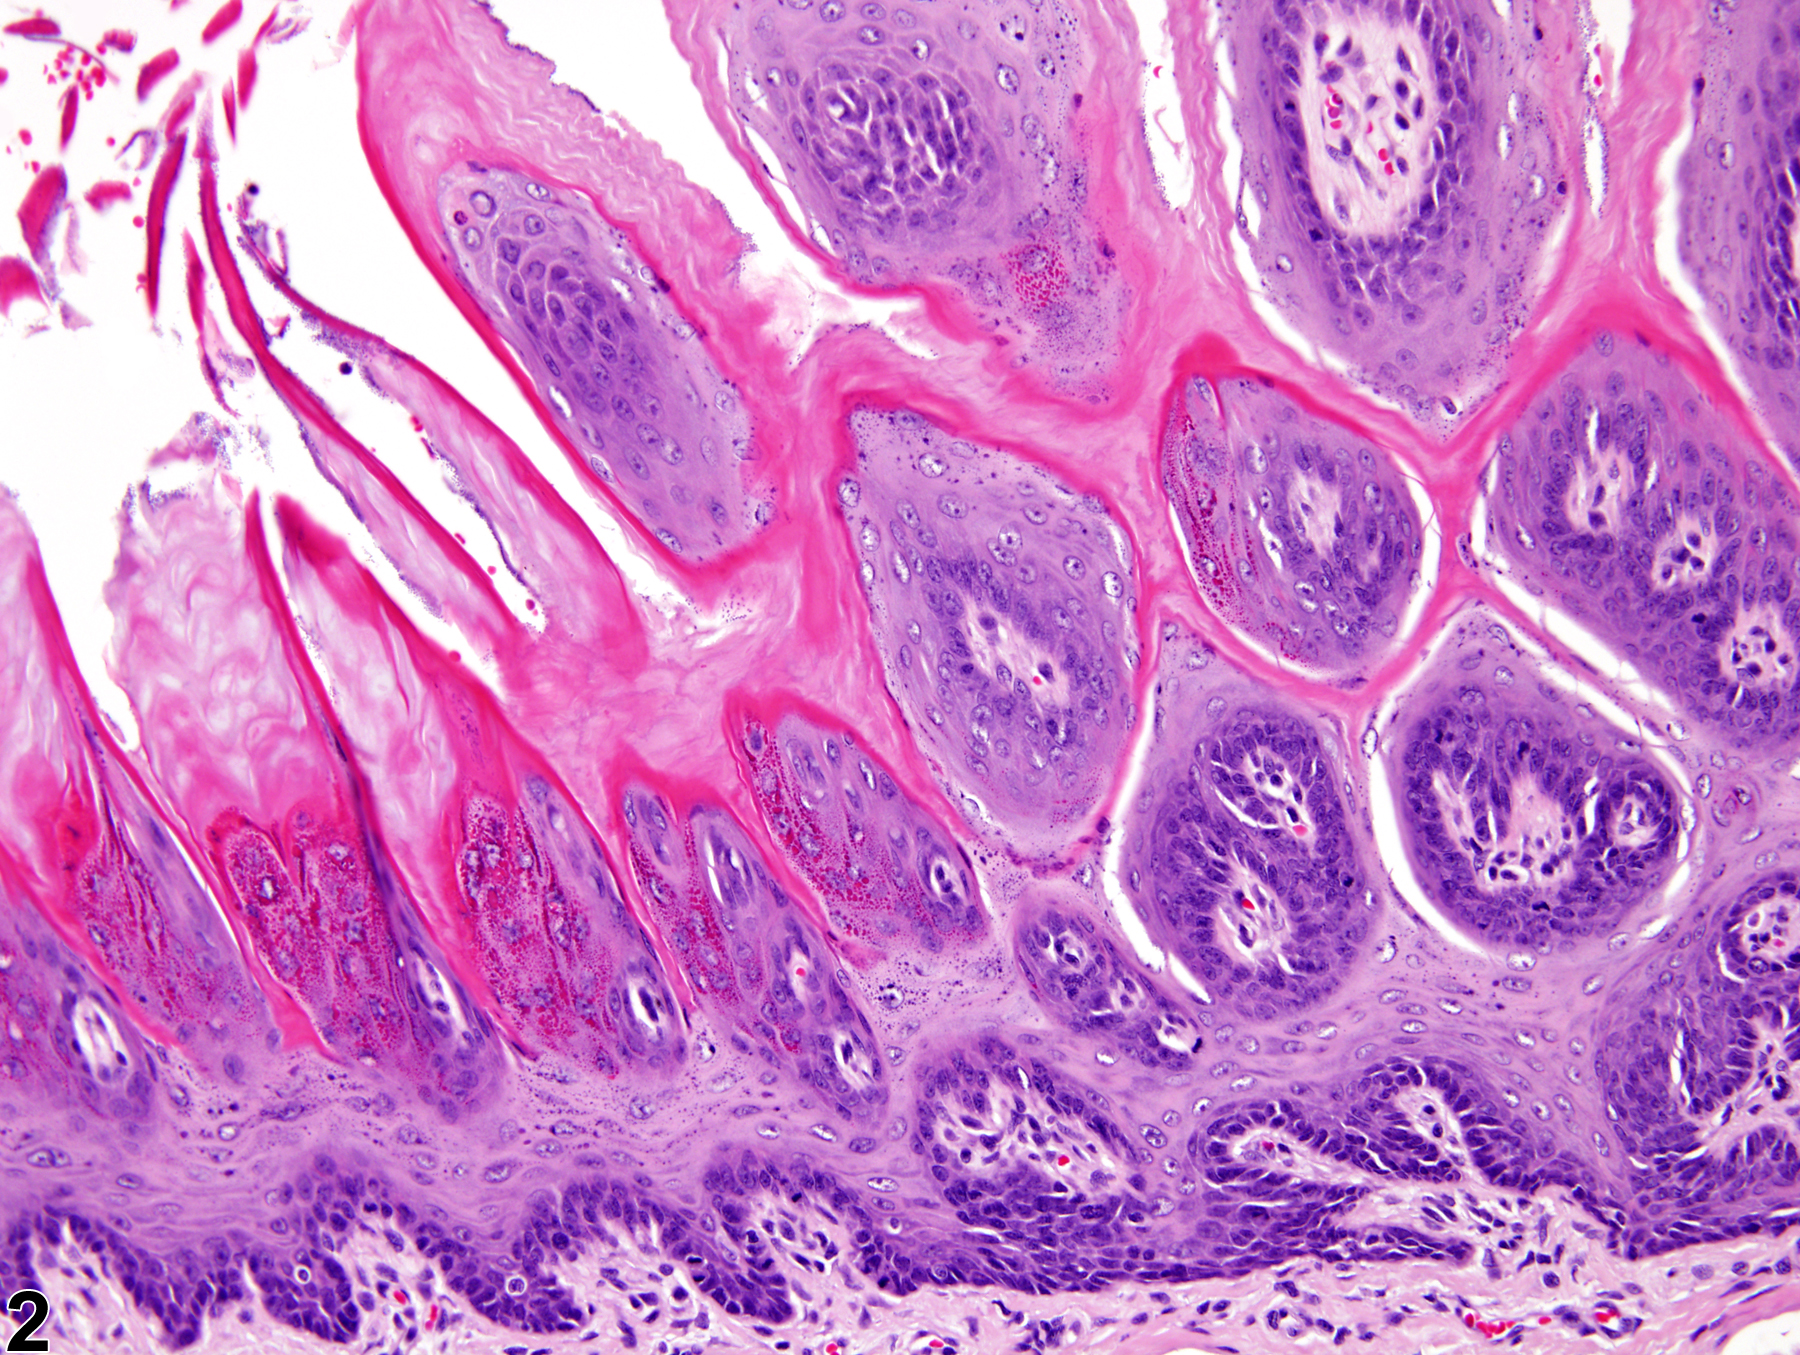 Image of hyperplasia in the tongue epithelium from a female F344/N rat in a chronic study